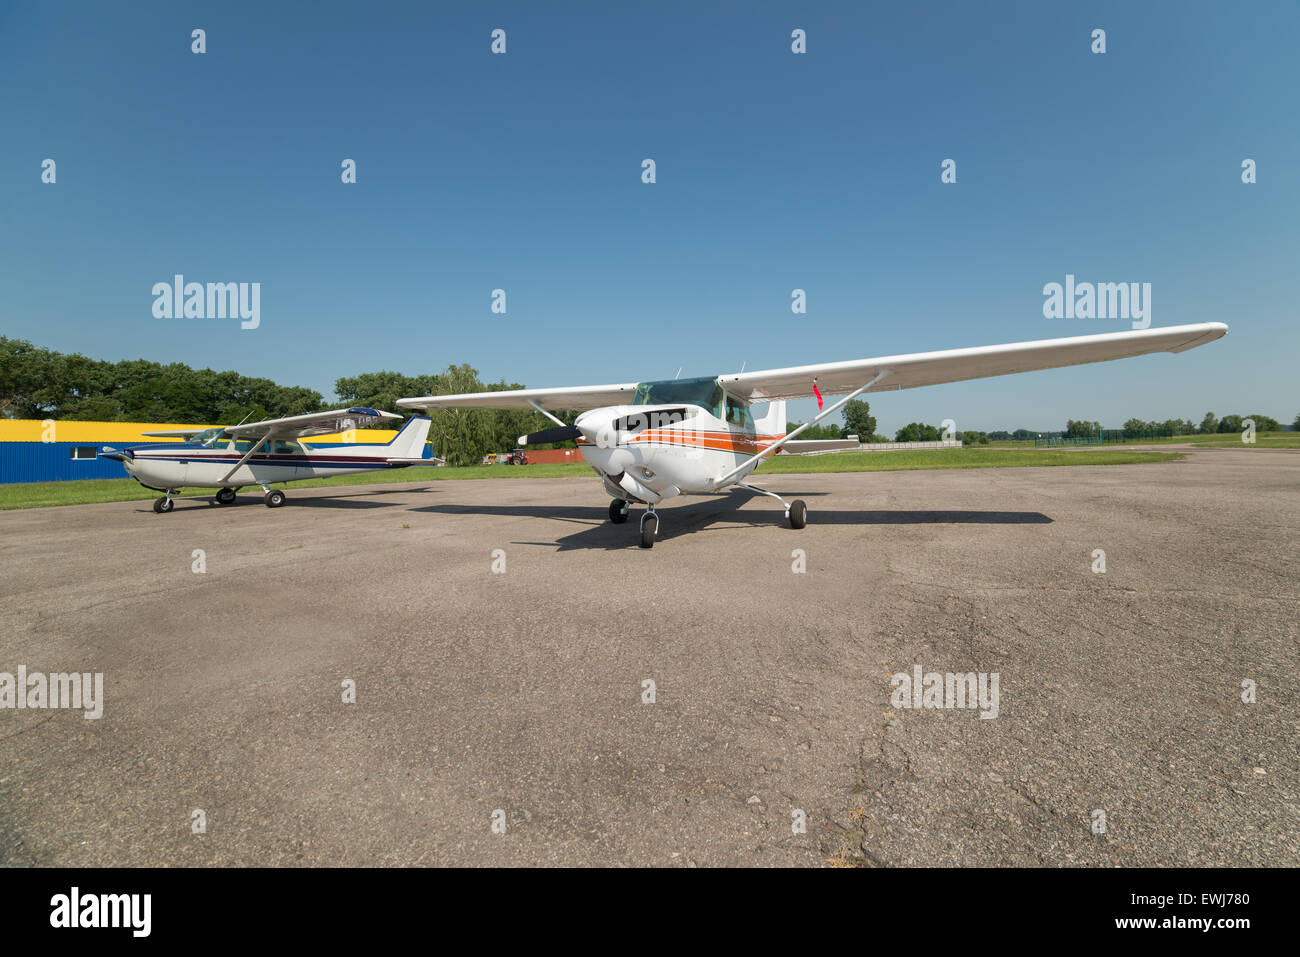 Two light planes parked on the private airfield in summer Stock Photo